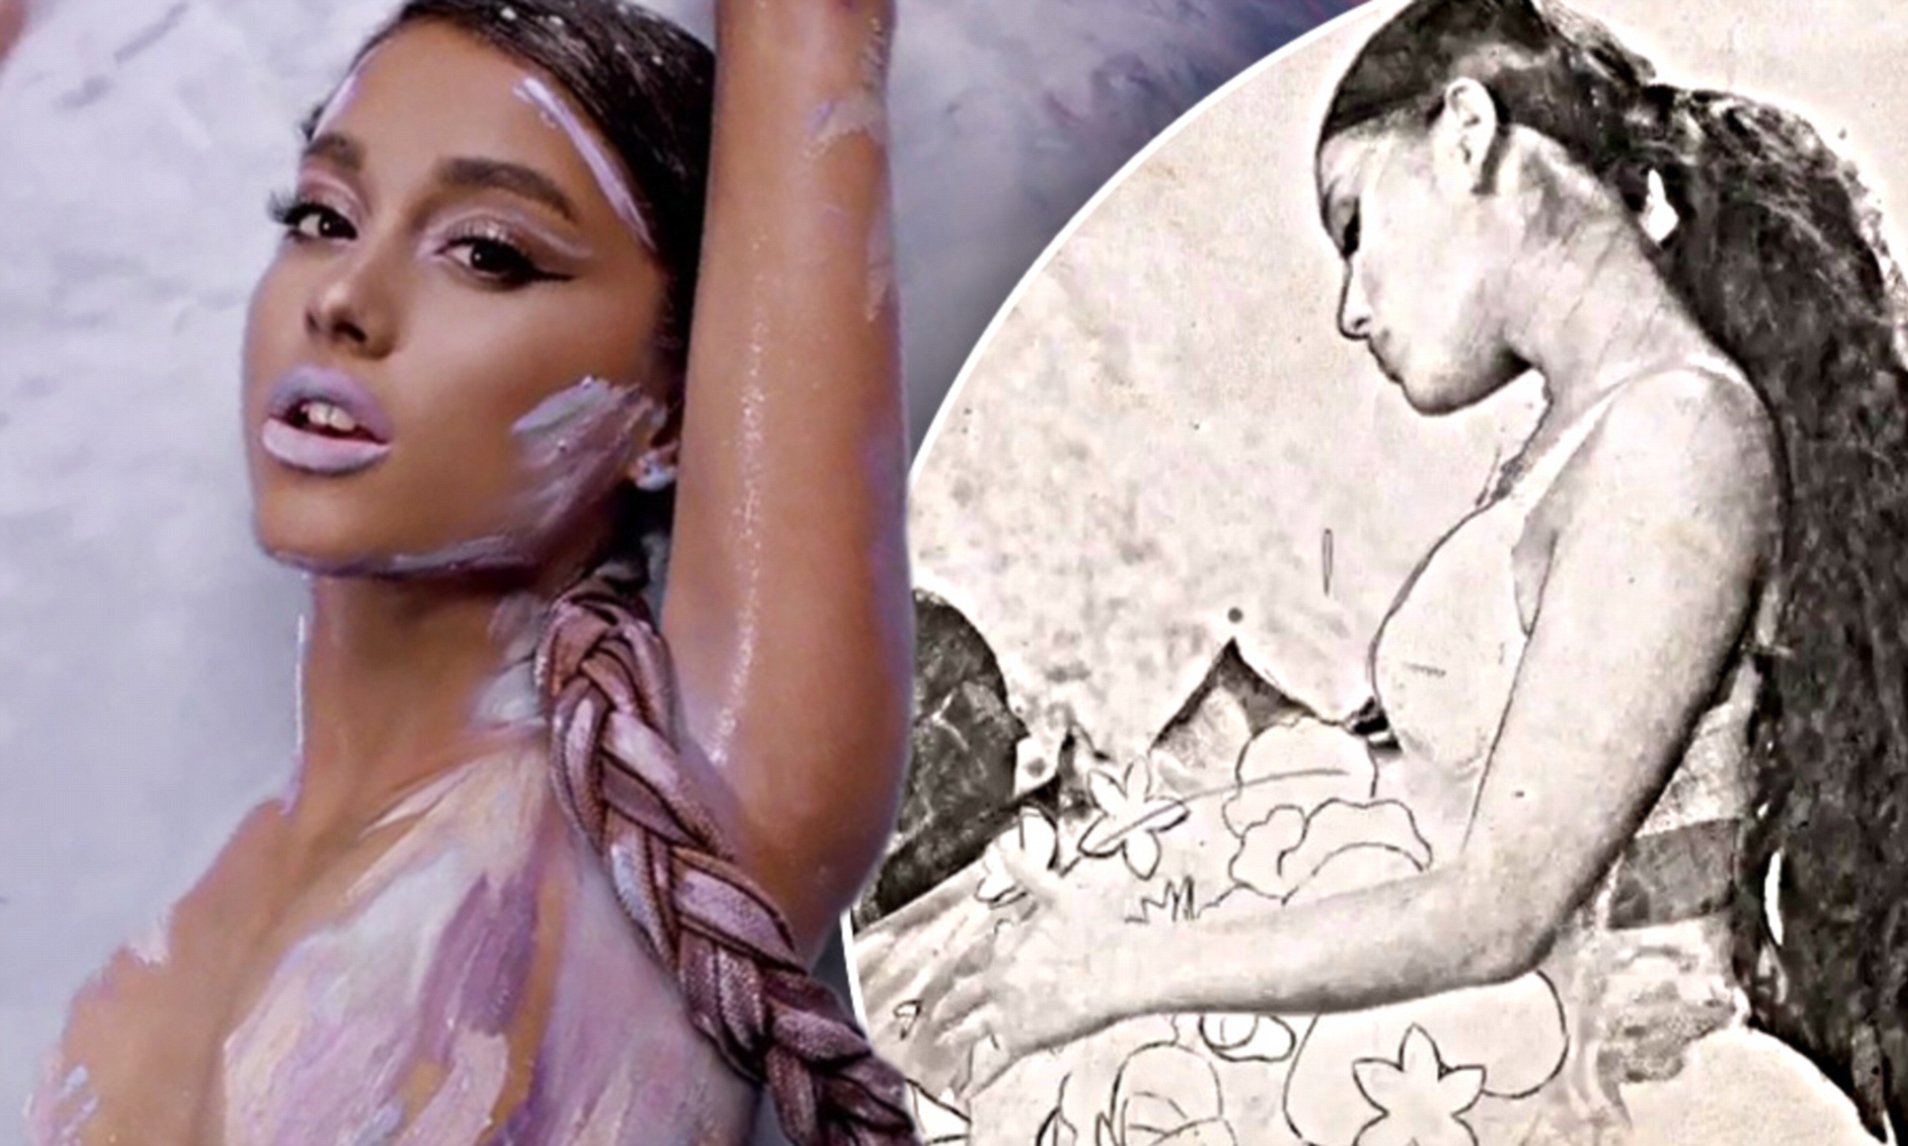 bill mages add ariana grande almost naked photo